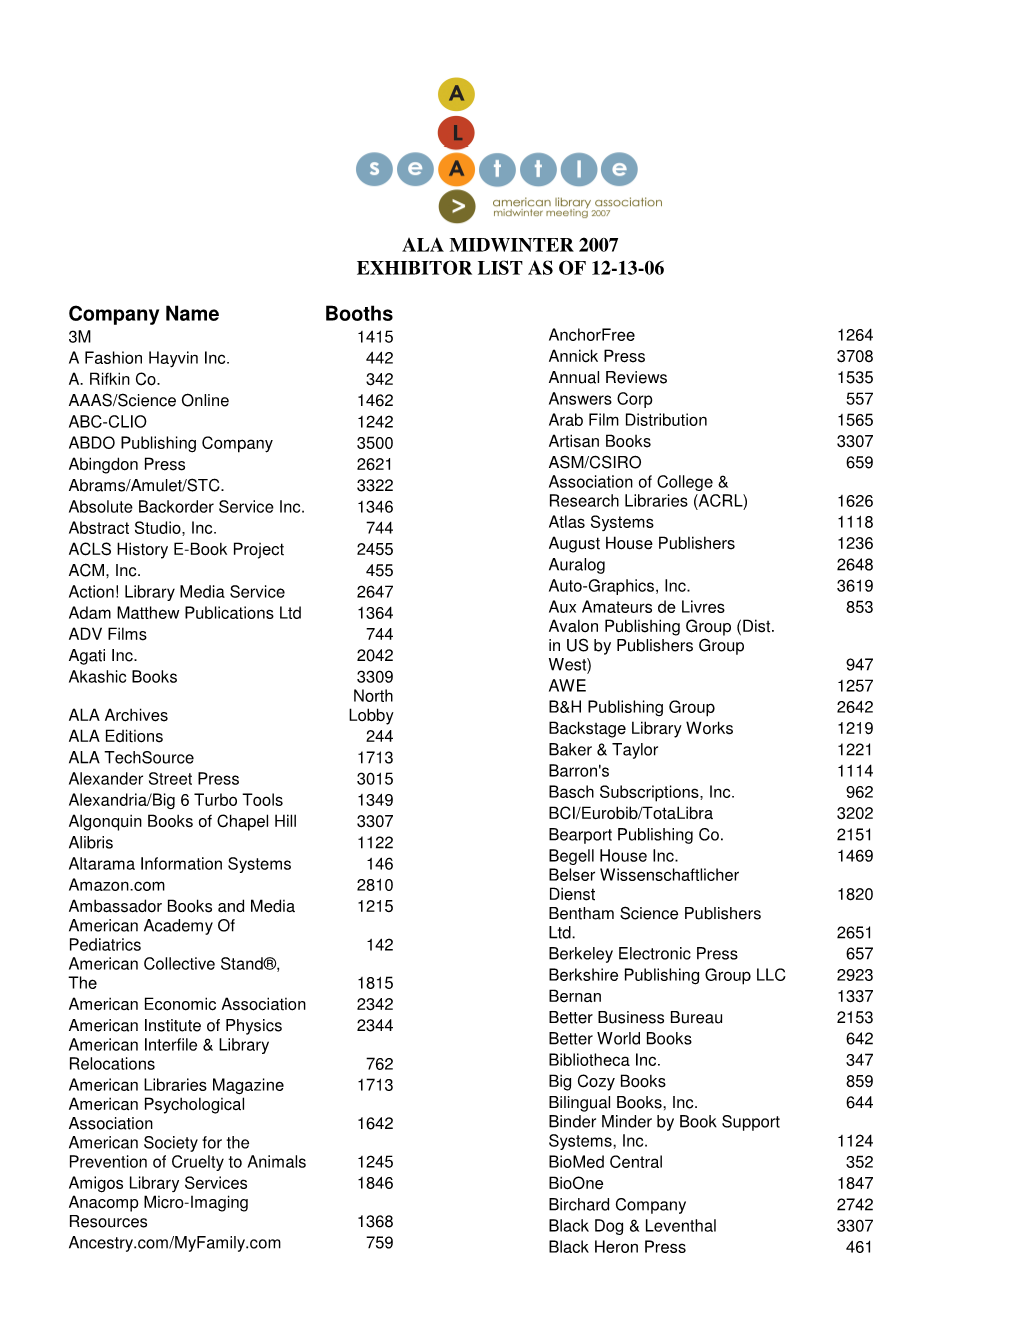 ALA MIDWINTER 2007 EXHIBITOR LIST AS of 12-13-06 Company